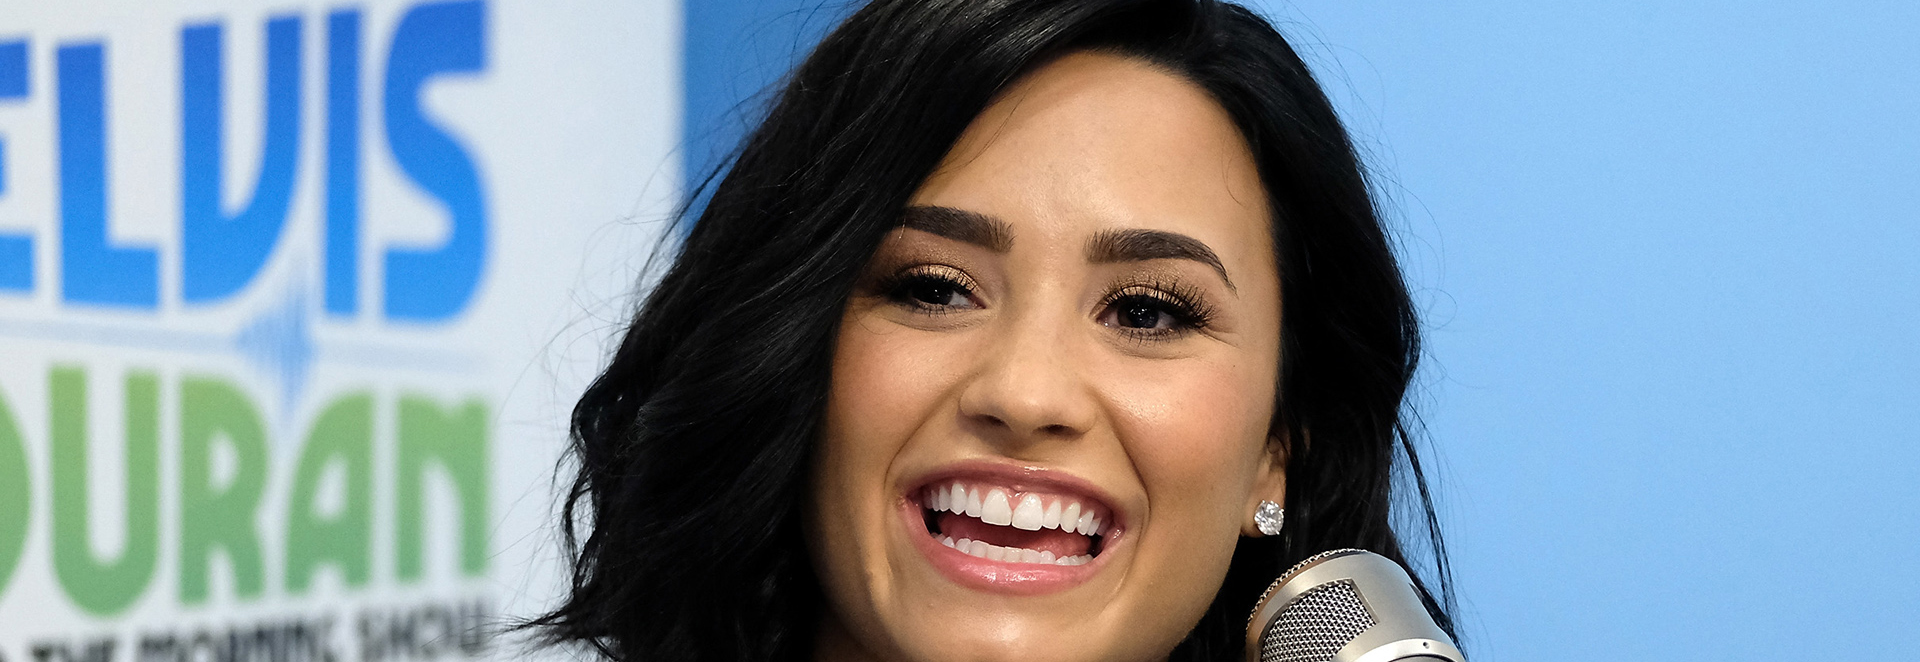 Demi Lovato smiling at a microphone